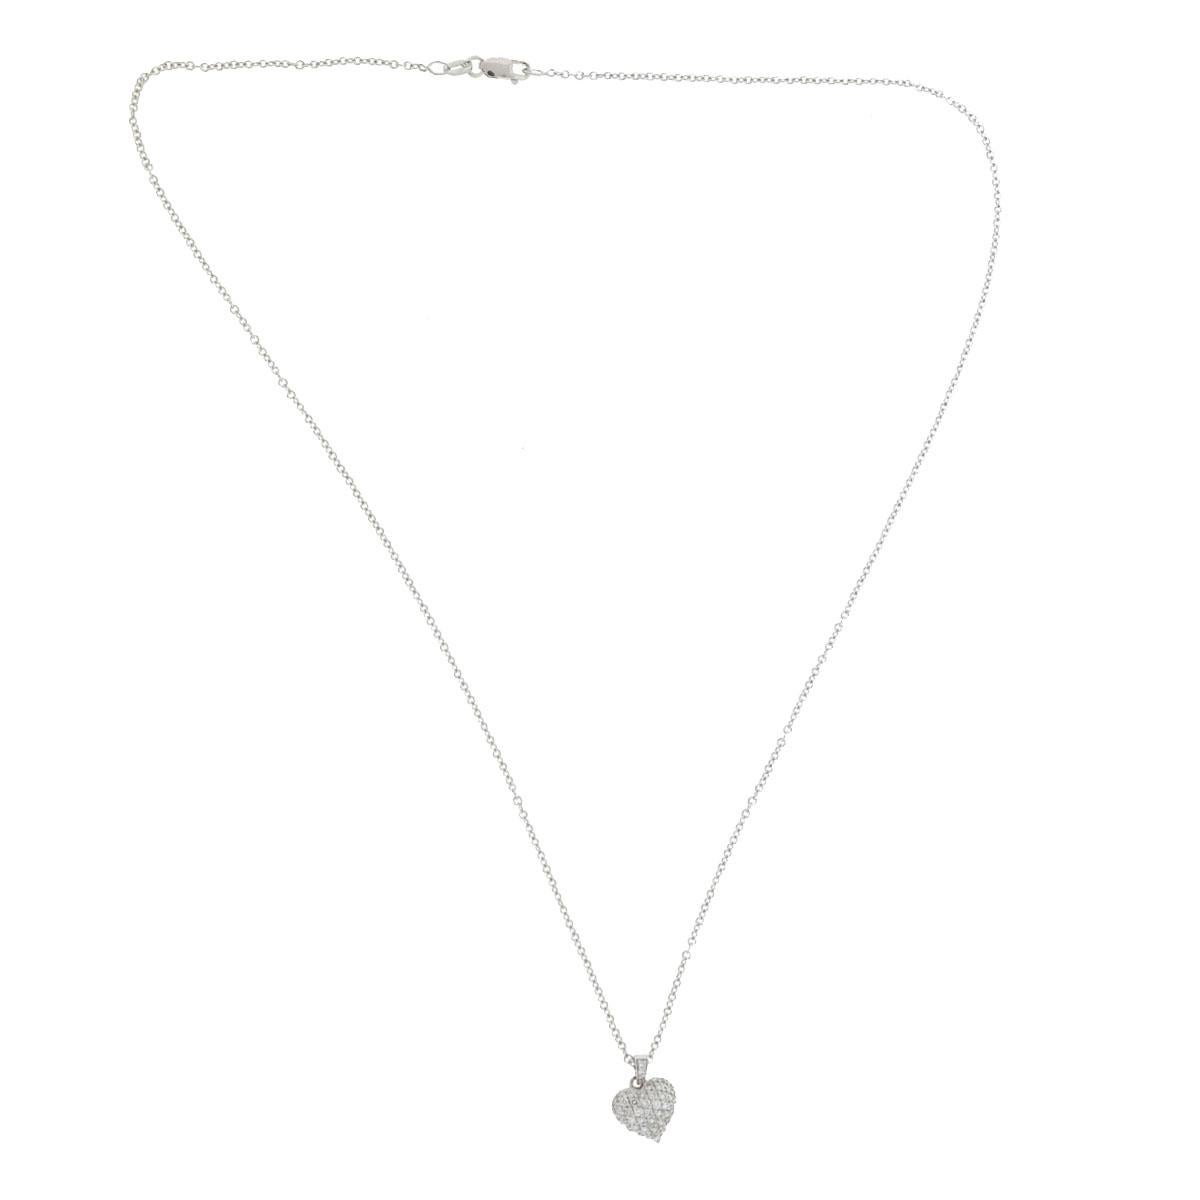 Company-N/A
Style-Heart Pave Necklace with Fine Chain Necklace 
Metal-18k White Gold
Stones-Diamonds - Approx. .48 Cts
Weight-4.19 grams
Chain Length -18